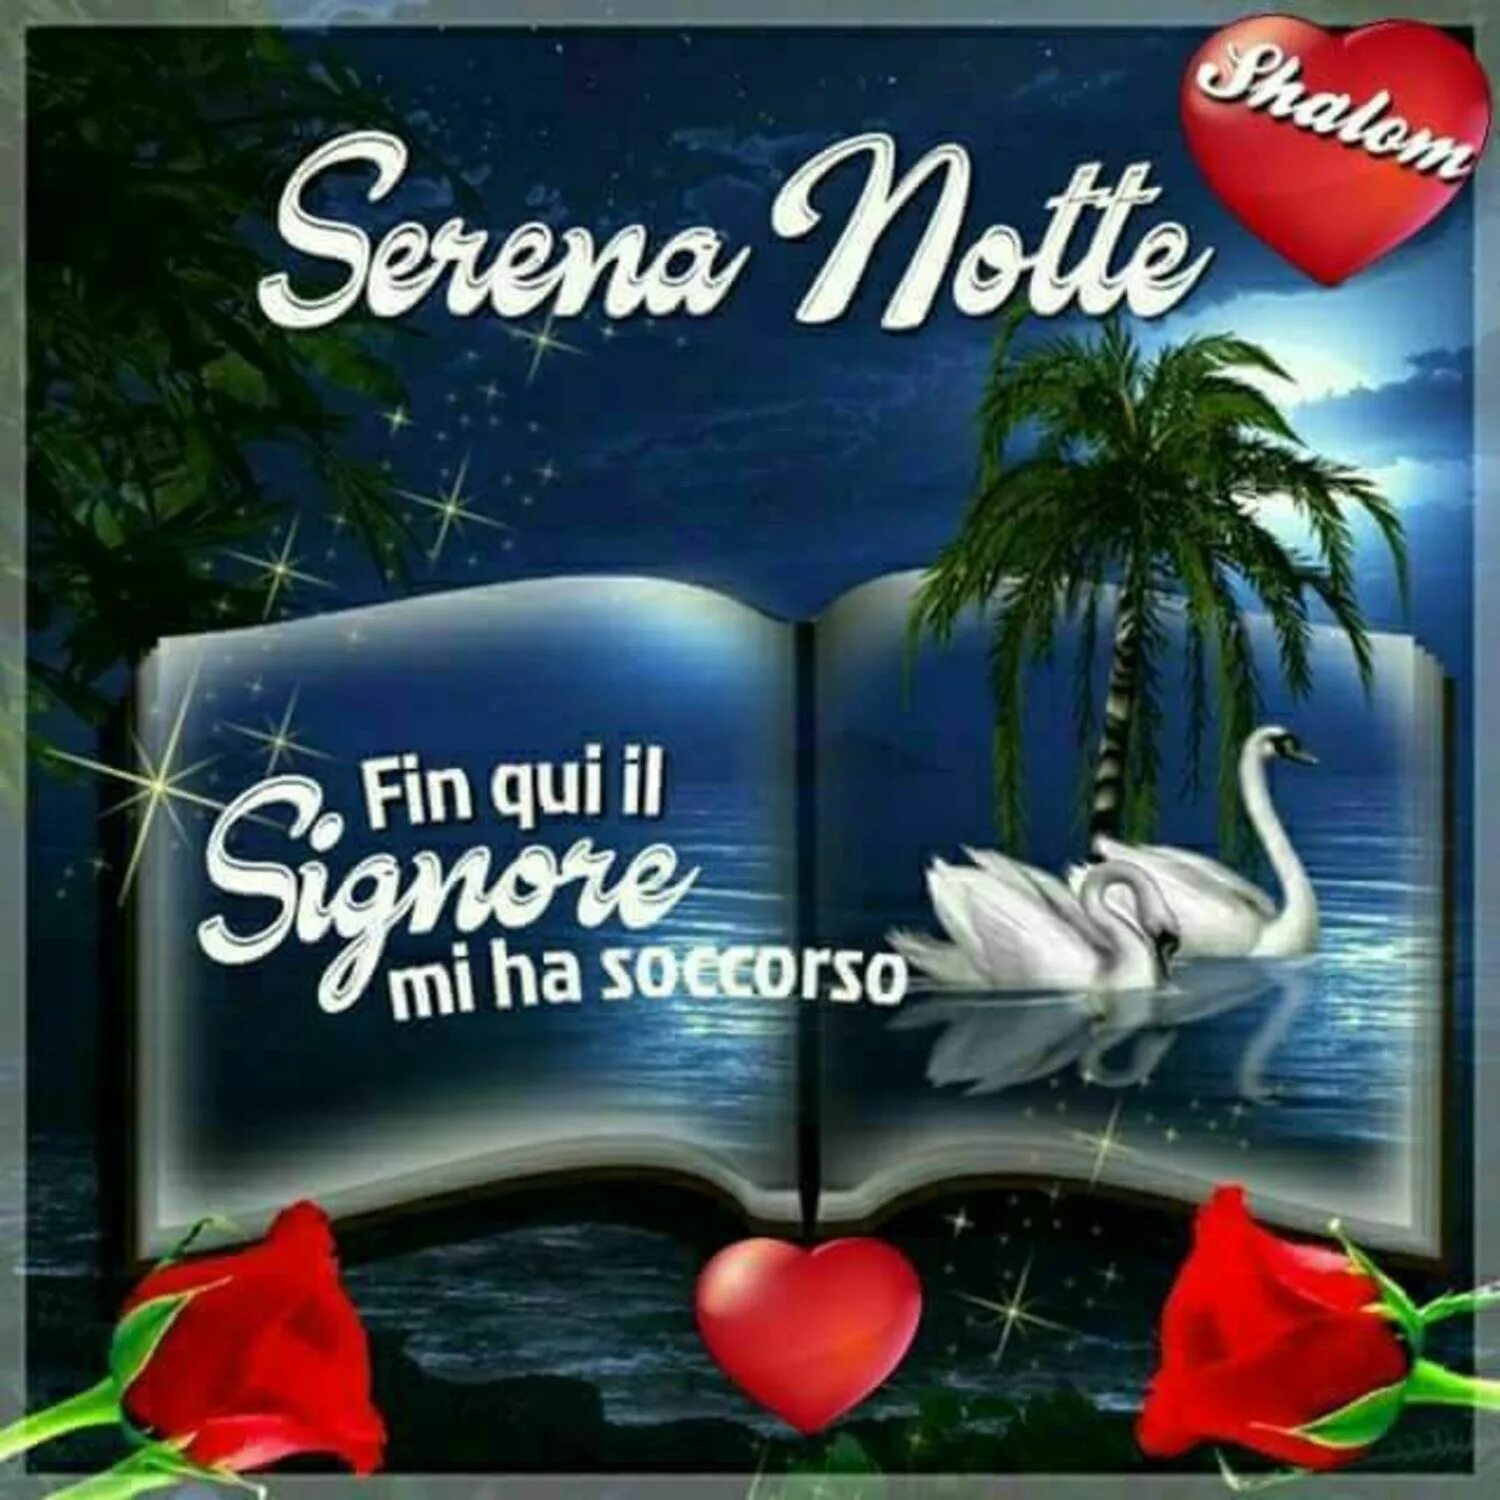 Dolce notte. Buona notte вино. Dolce notte картинки.